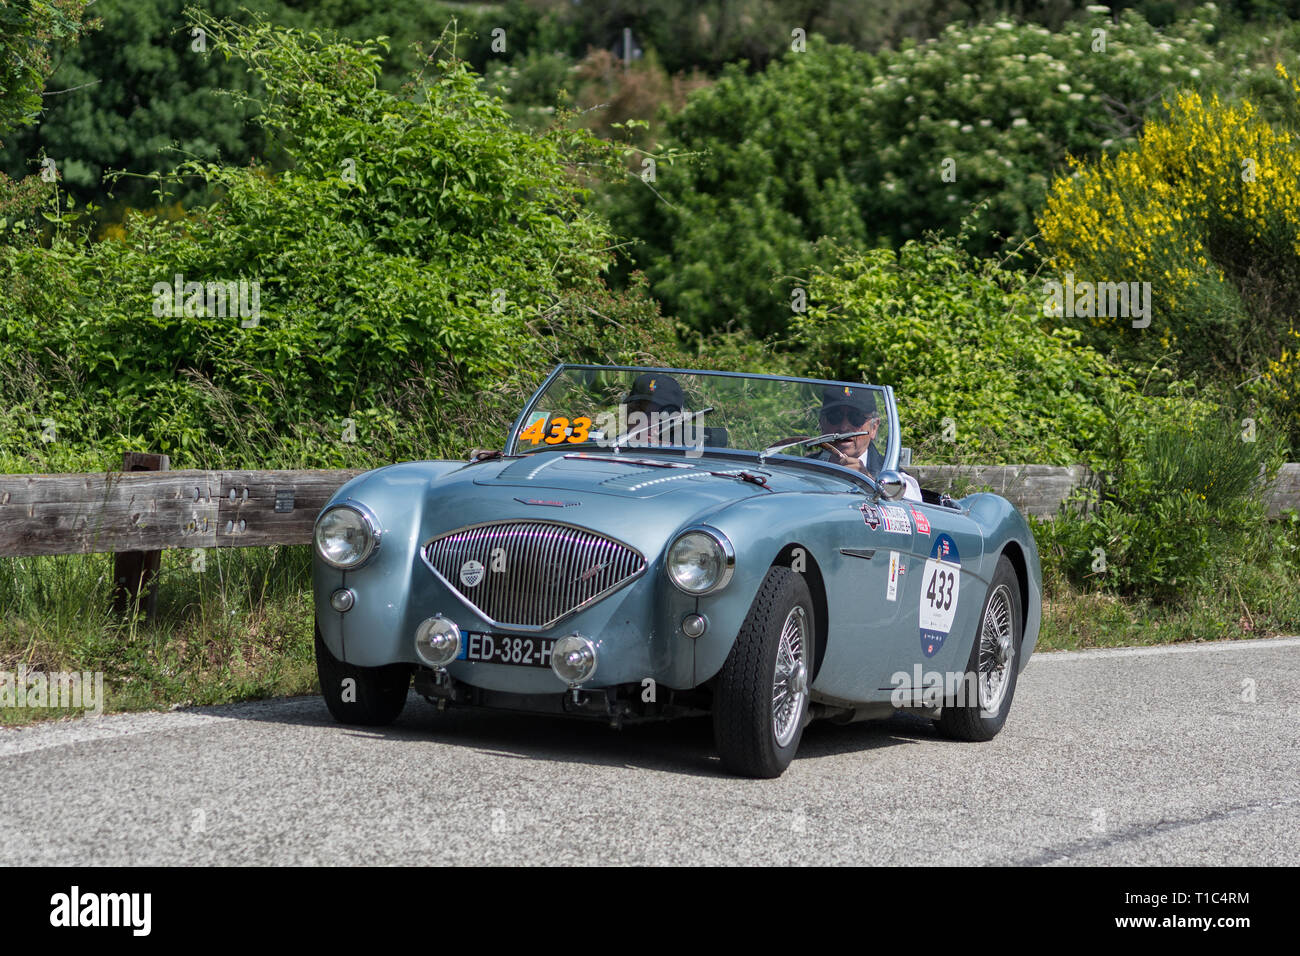 AUSTIN HEALEY 100/4 BN2 1956 on an old racing car in rally Mille Miglia 2018 the famous italian historical race (1927-1957) Stock Photo